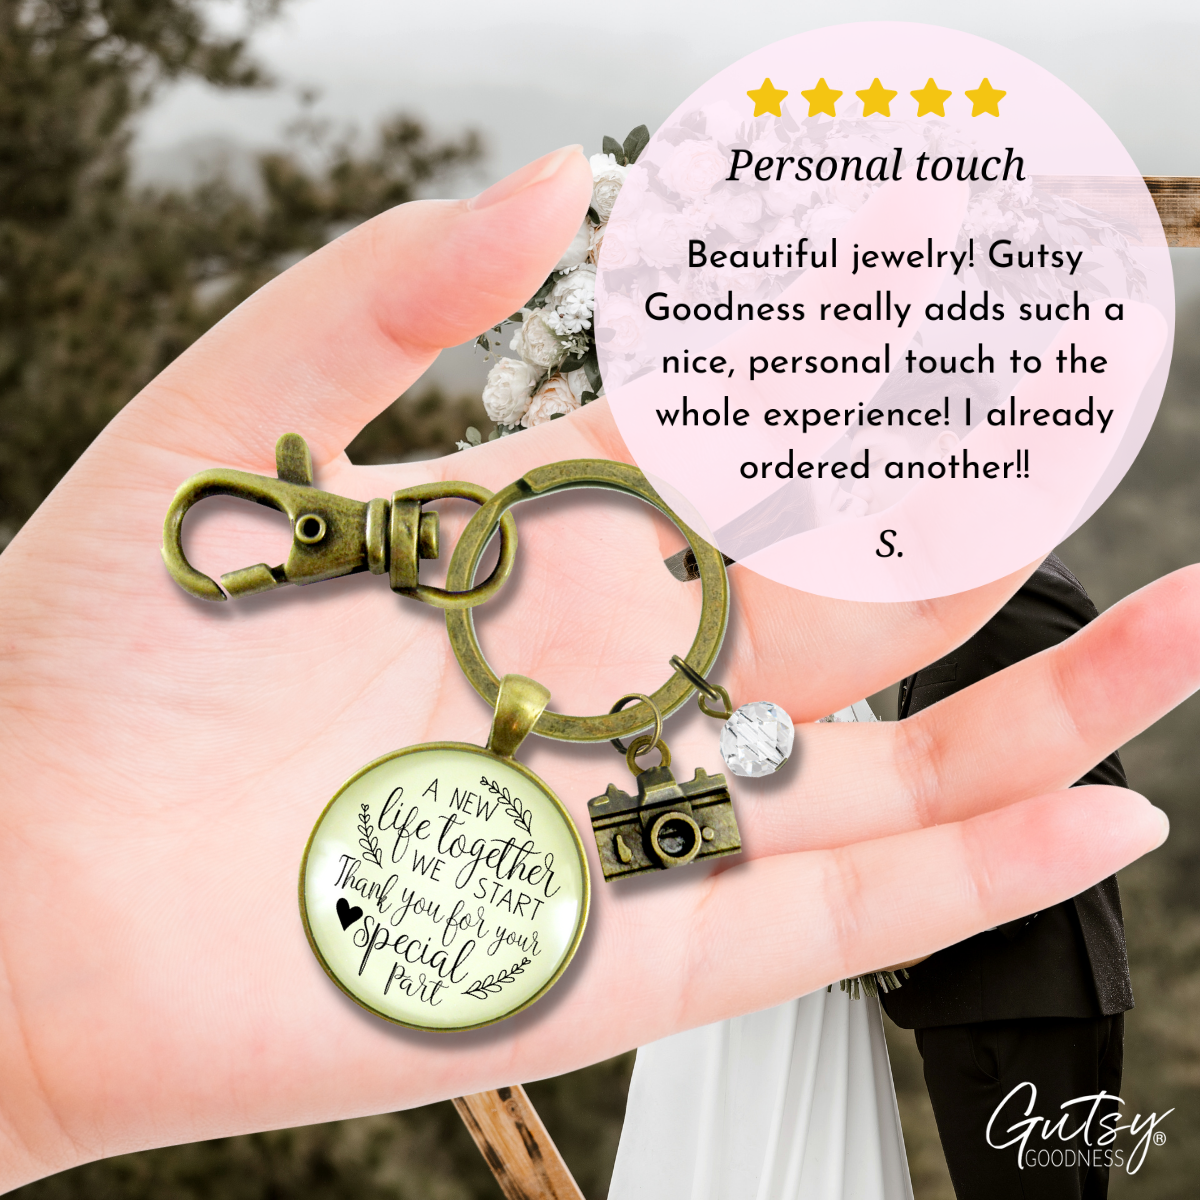 Wedding Photographer Gift Keychain A New Life We Start Rustic Camera Thank You Card - Gutsy Goodness;Wedding Photographer Gift Keychain A New Life We Start Rustic Camera Thank You Card - Gutsy Goodness Handmade Jewelry Gifts